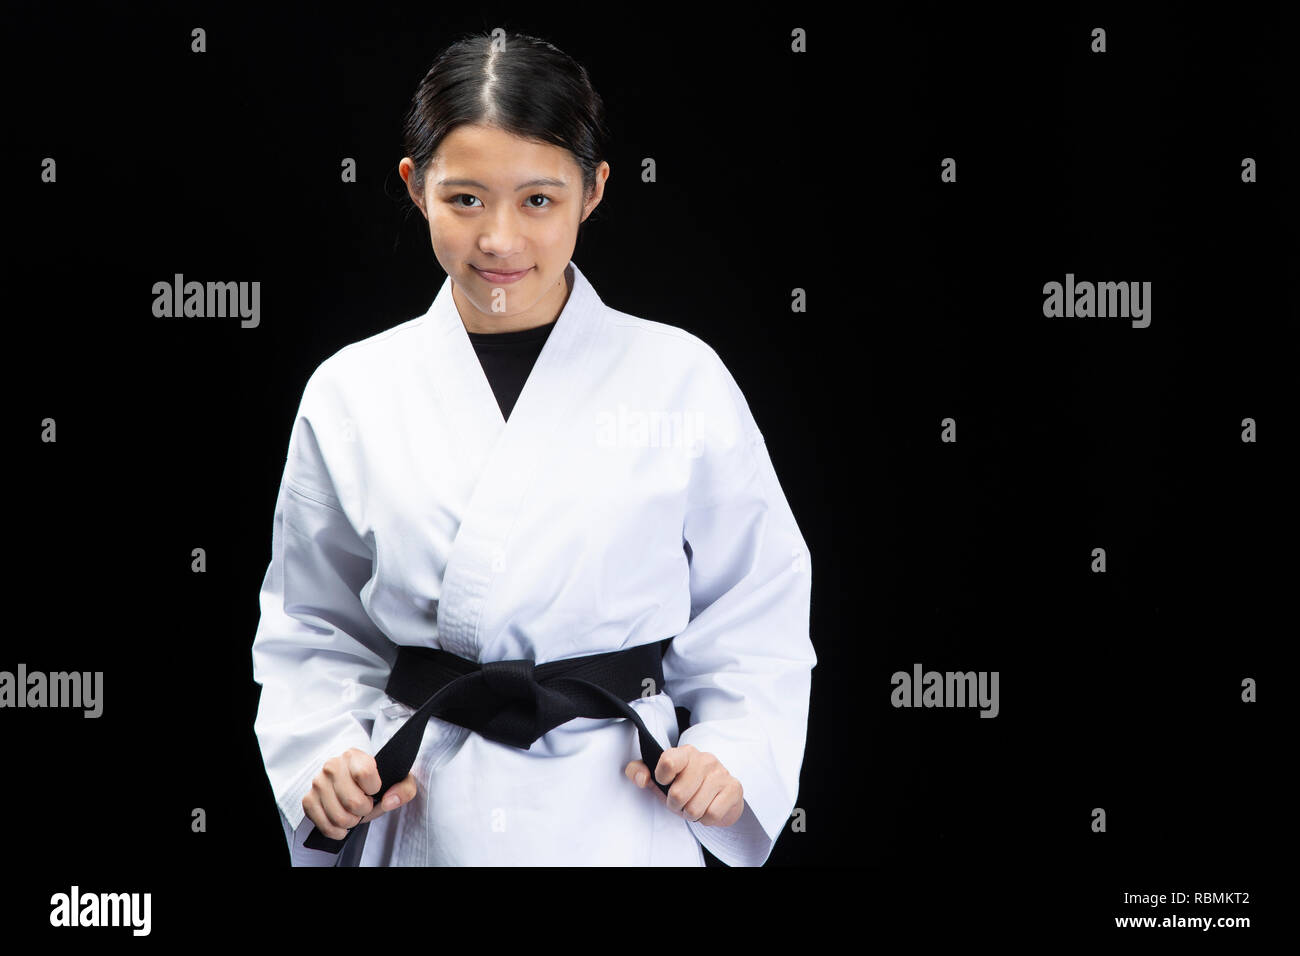 Young beautiful woman wearing karate suit holding black belt and smiling on black background Stock Photo